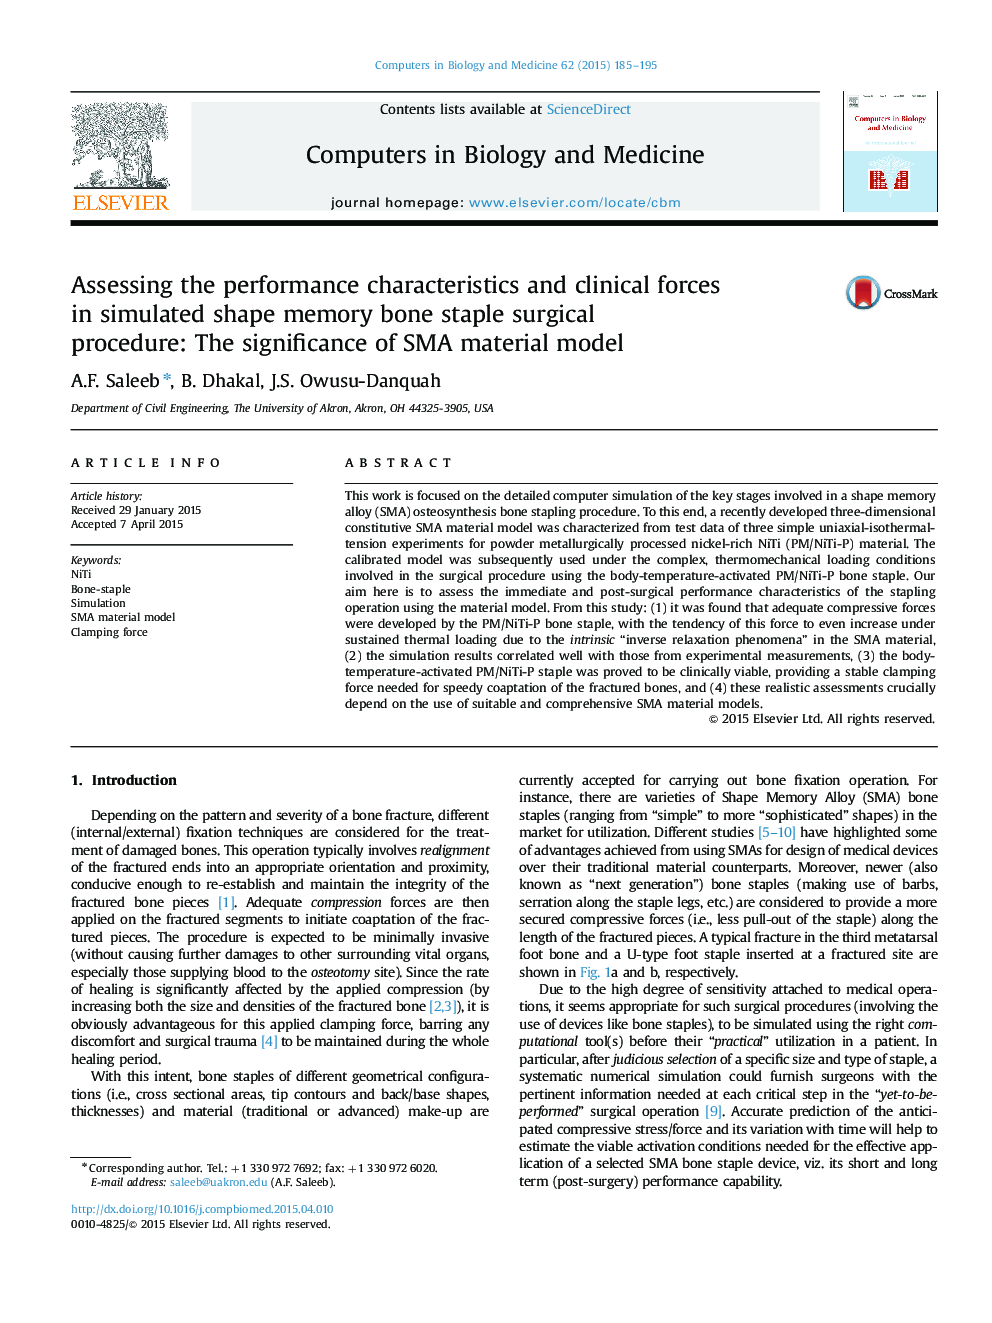 Assessing the performance characteristics and clinical forces in simulated shape memory bone staple surgical procedure: The significance of SMA material model